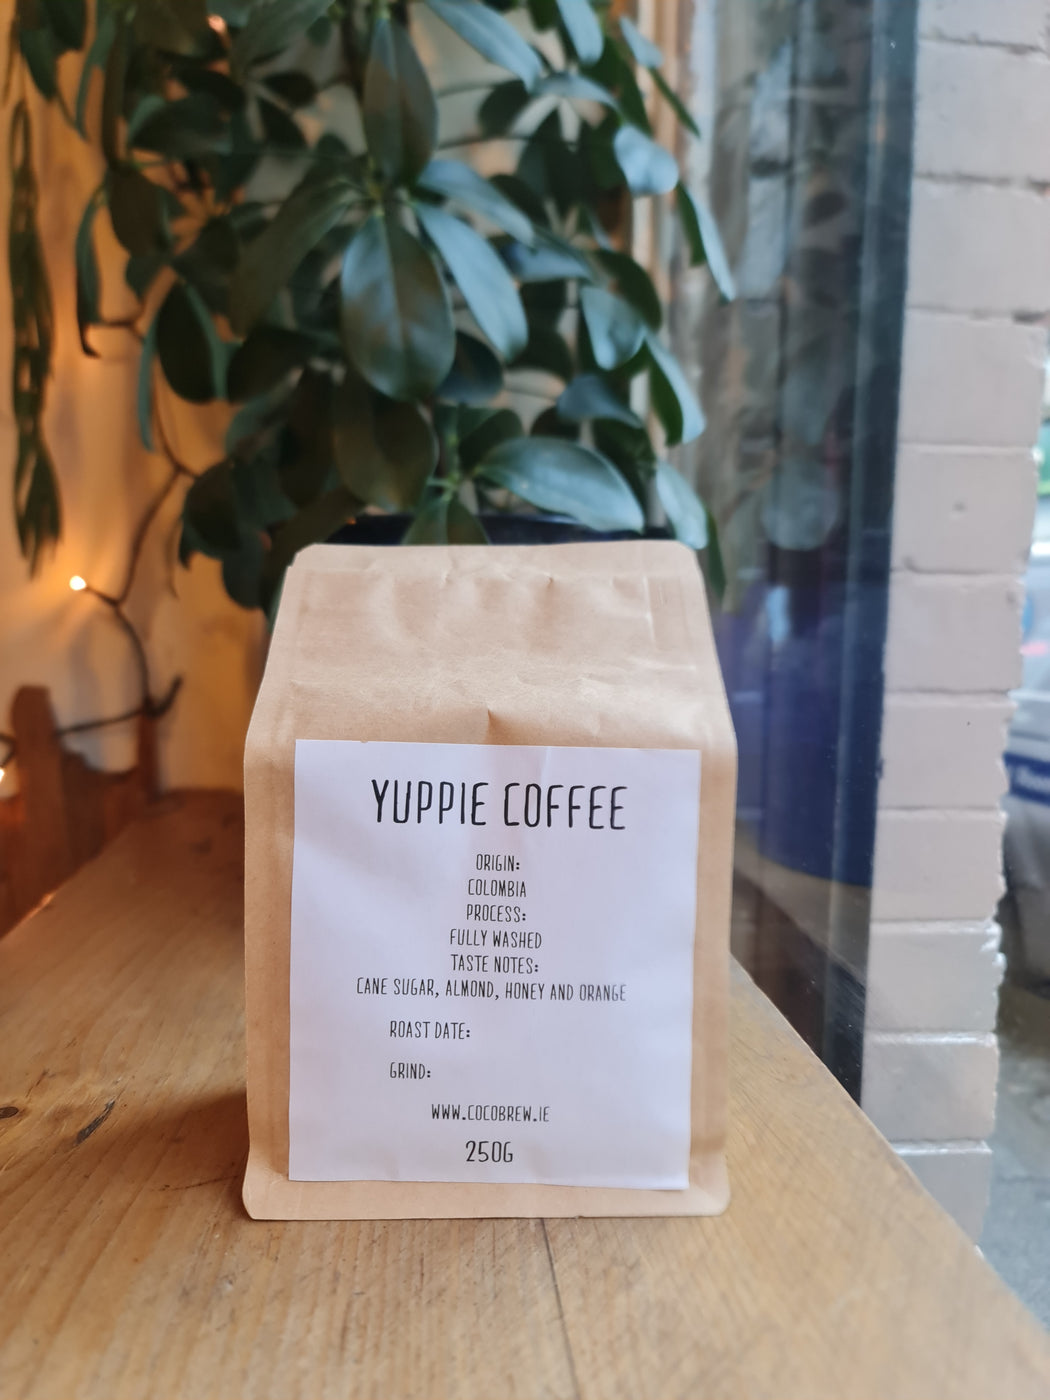 Yuppie coffee Colombia